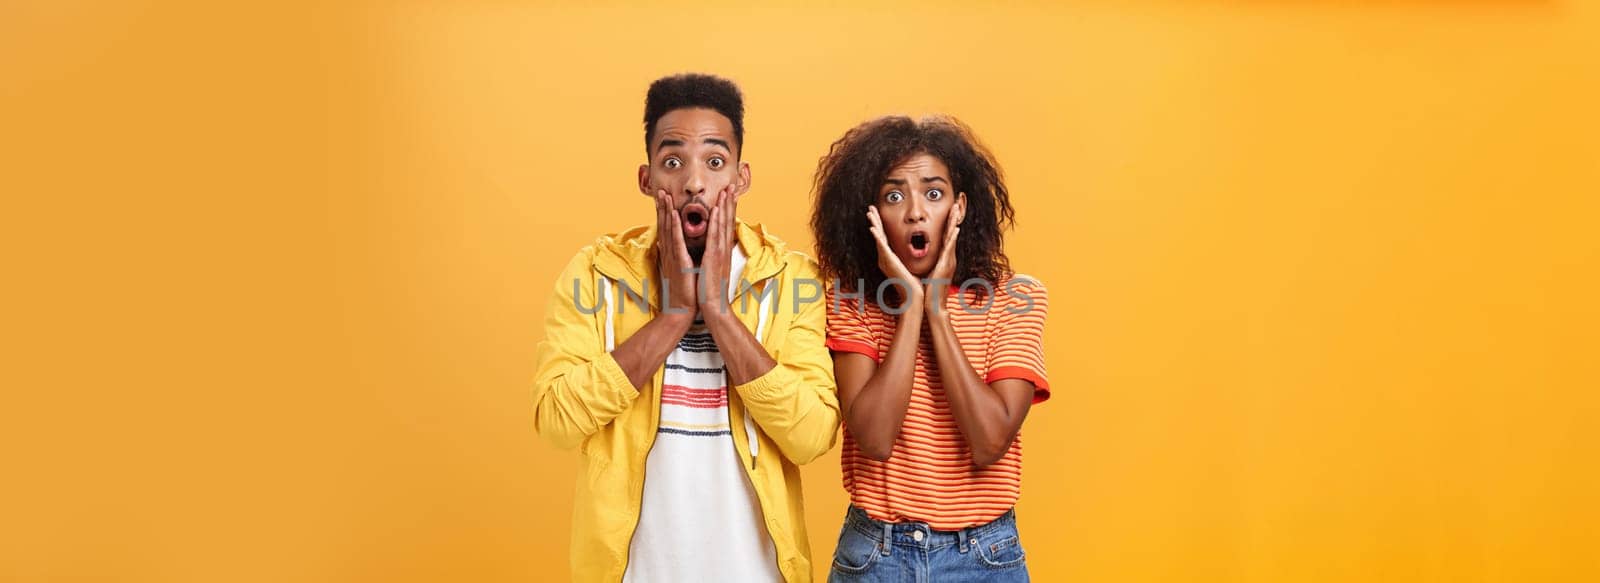 Portrait of shocked and stunned speechless girlfriend dropping jaw from amazement with boyfriend feeling amazed from shook news posing together surprised and astonished over orange wall. Lifestyle.